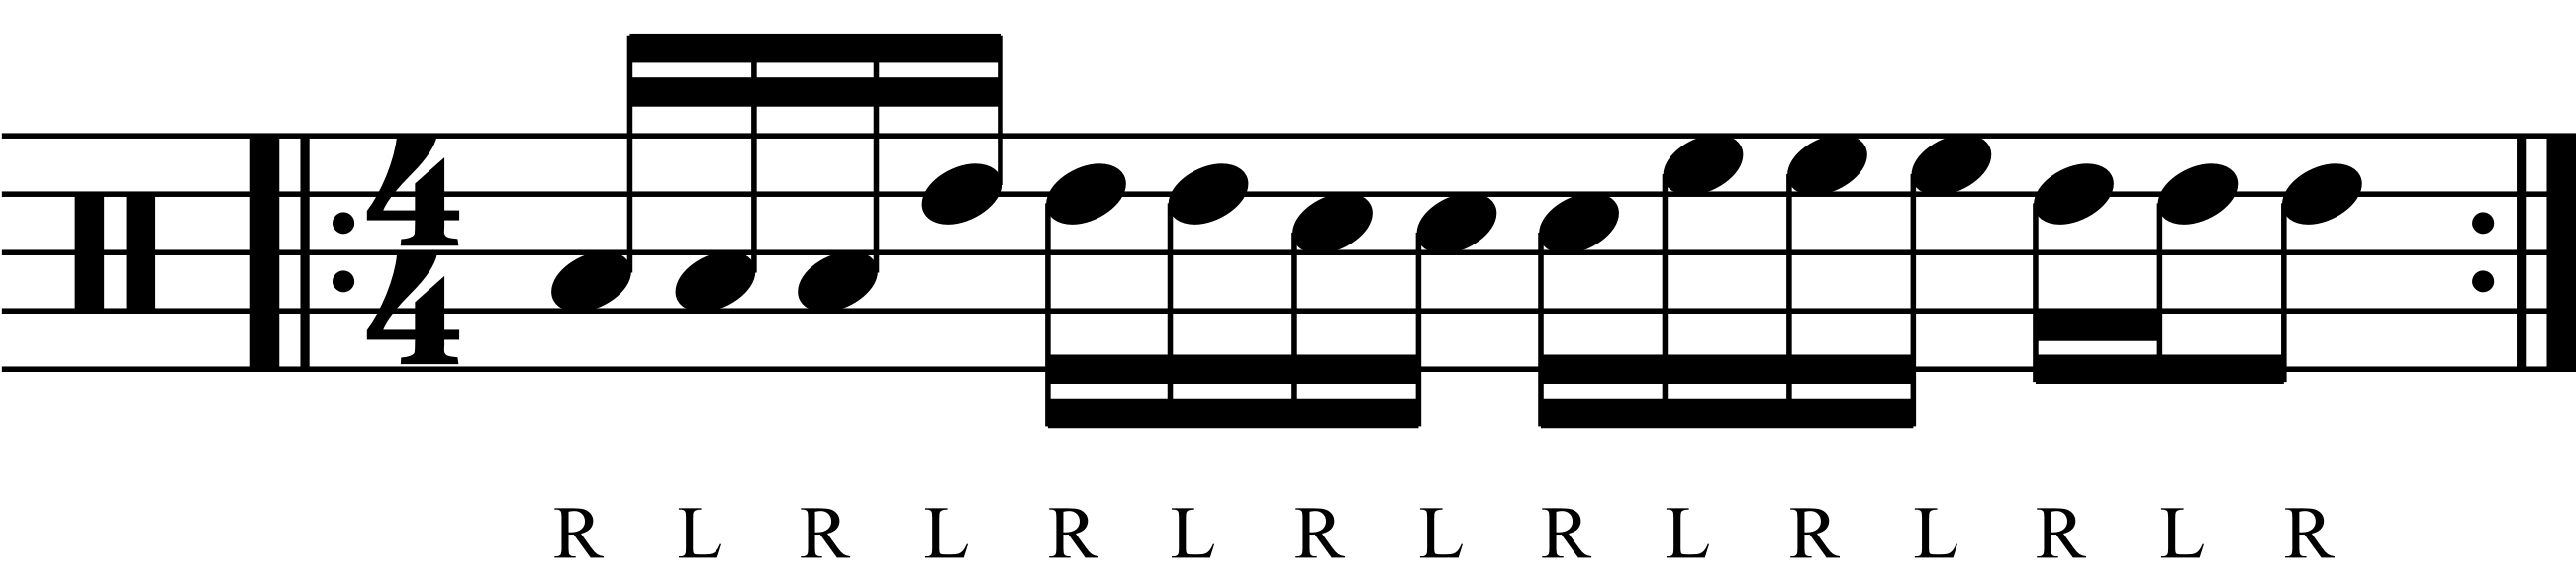 Single stroke roll orchestration in threes